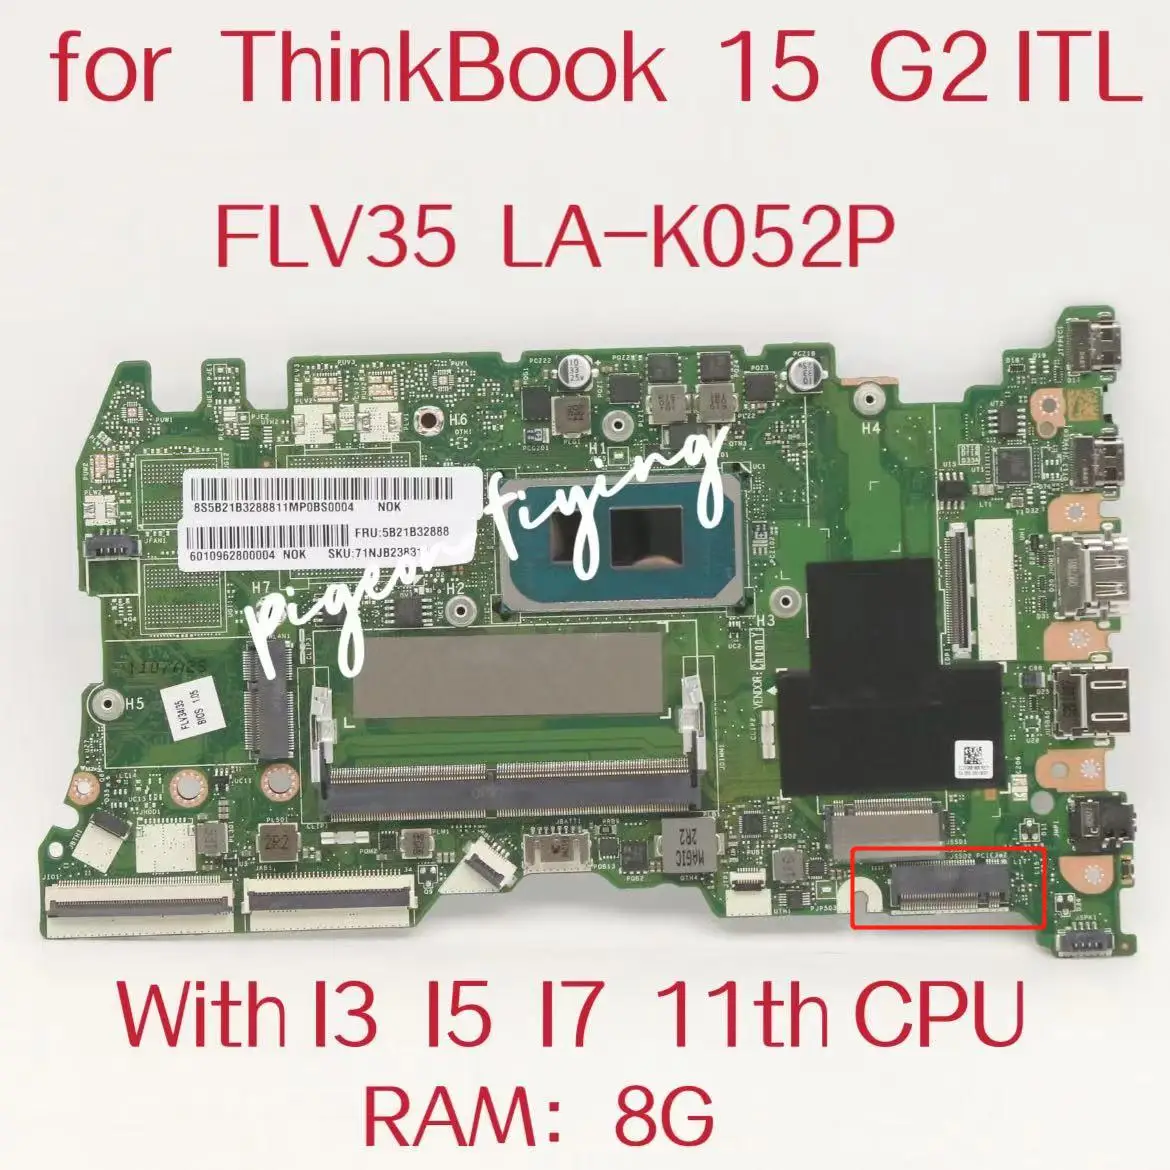 

FLV35 LA-K052P Mainboard For Lenovo ThinkBook 15 G2 ITL Laptop Montherboard With I3 I5 I7 11th CPU RAM:8G 100% Test OK